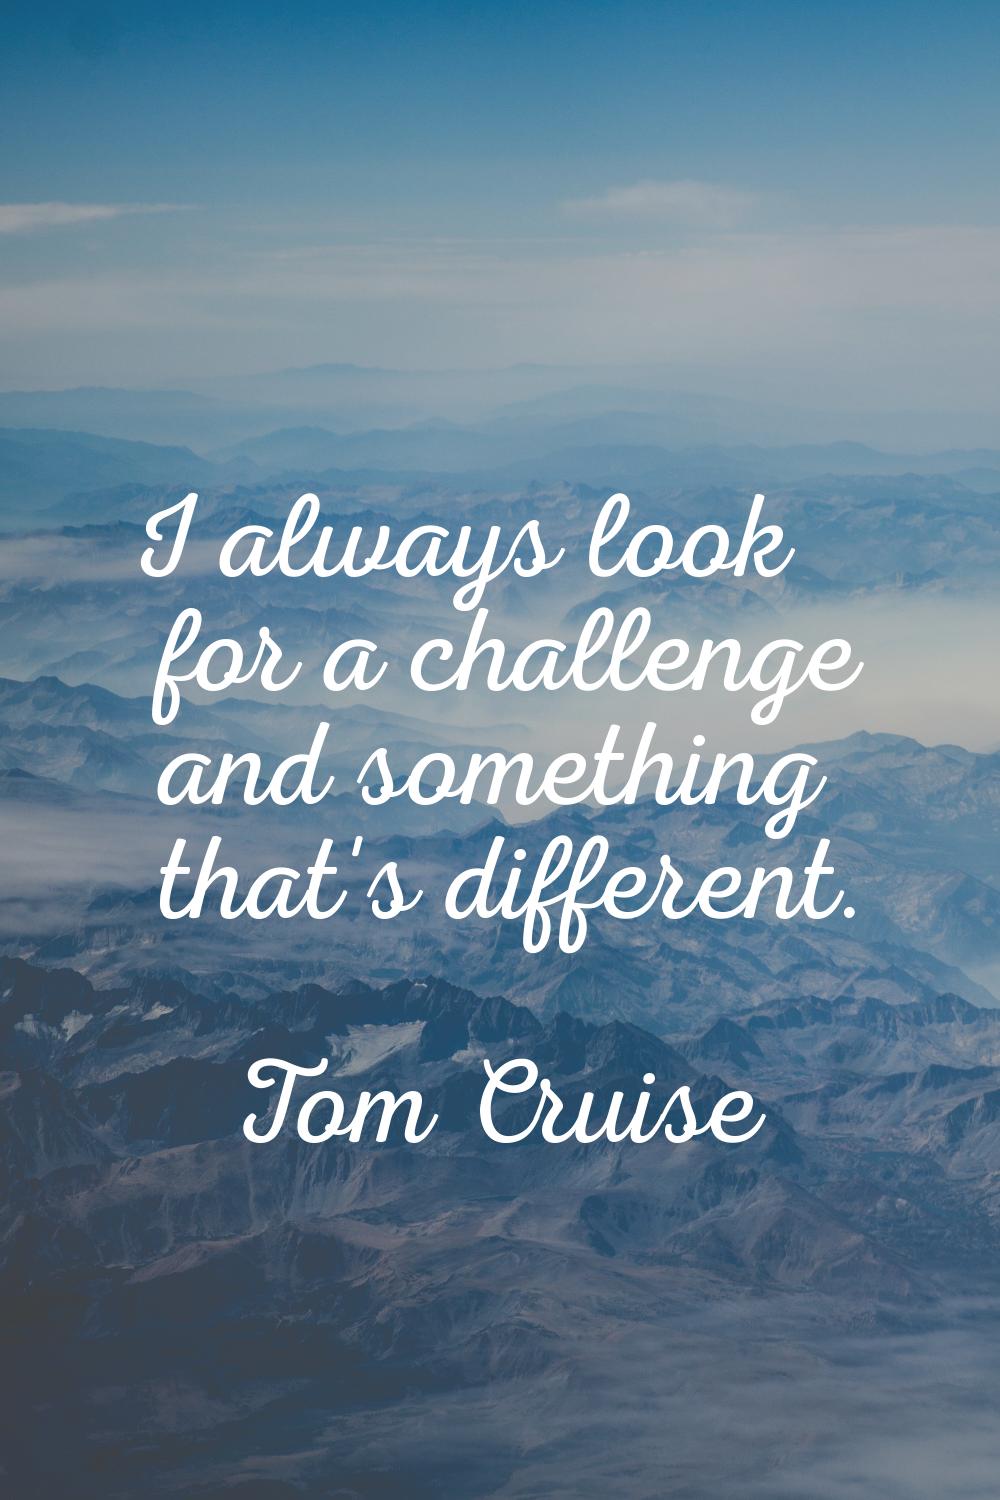 I always look for a challenge and something that's different.